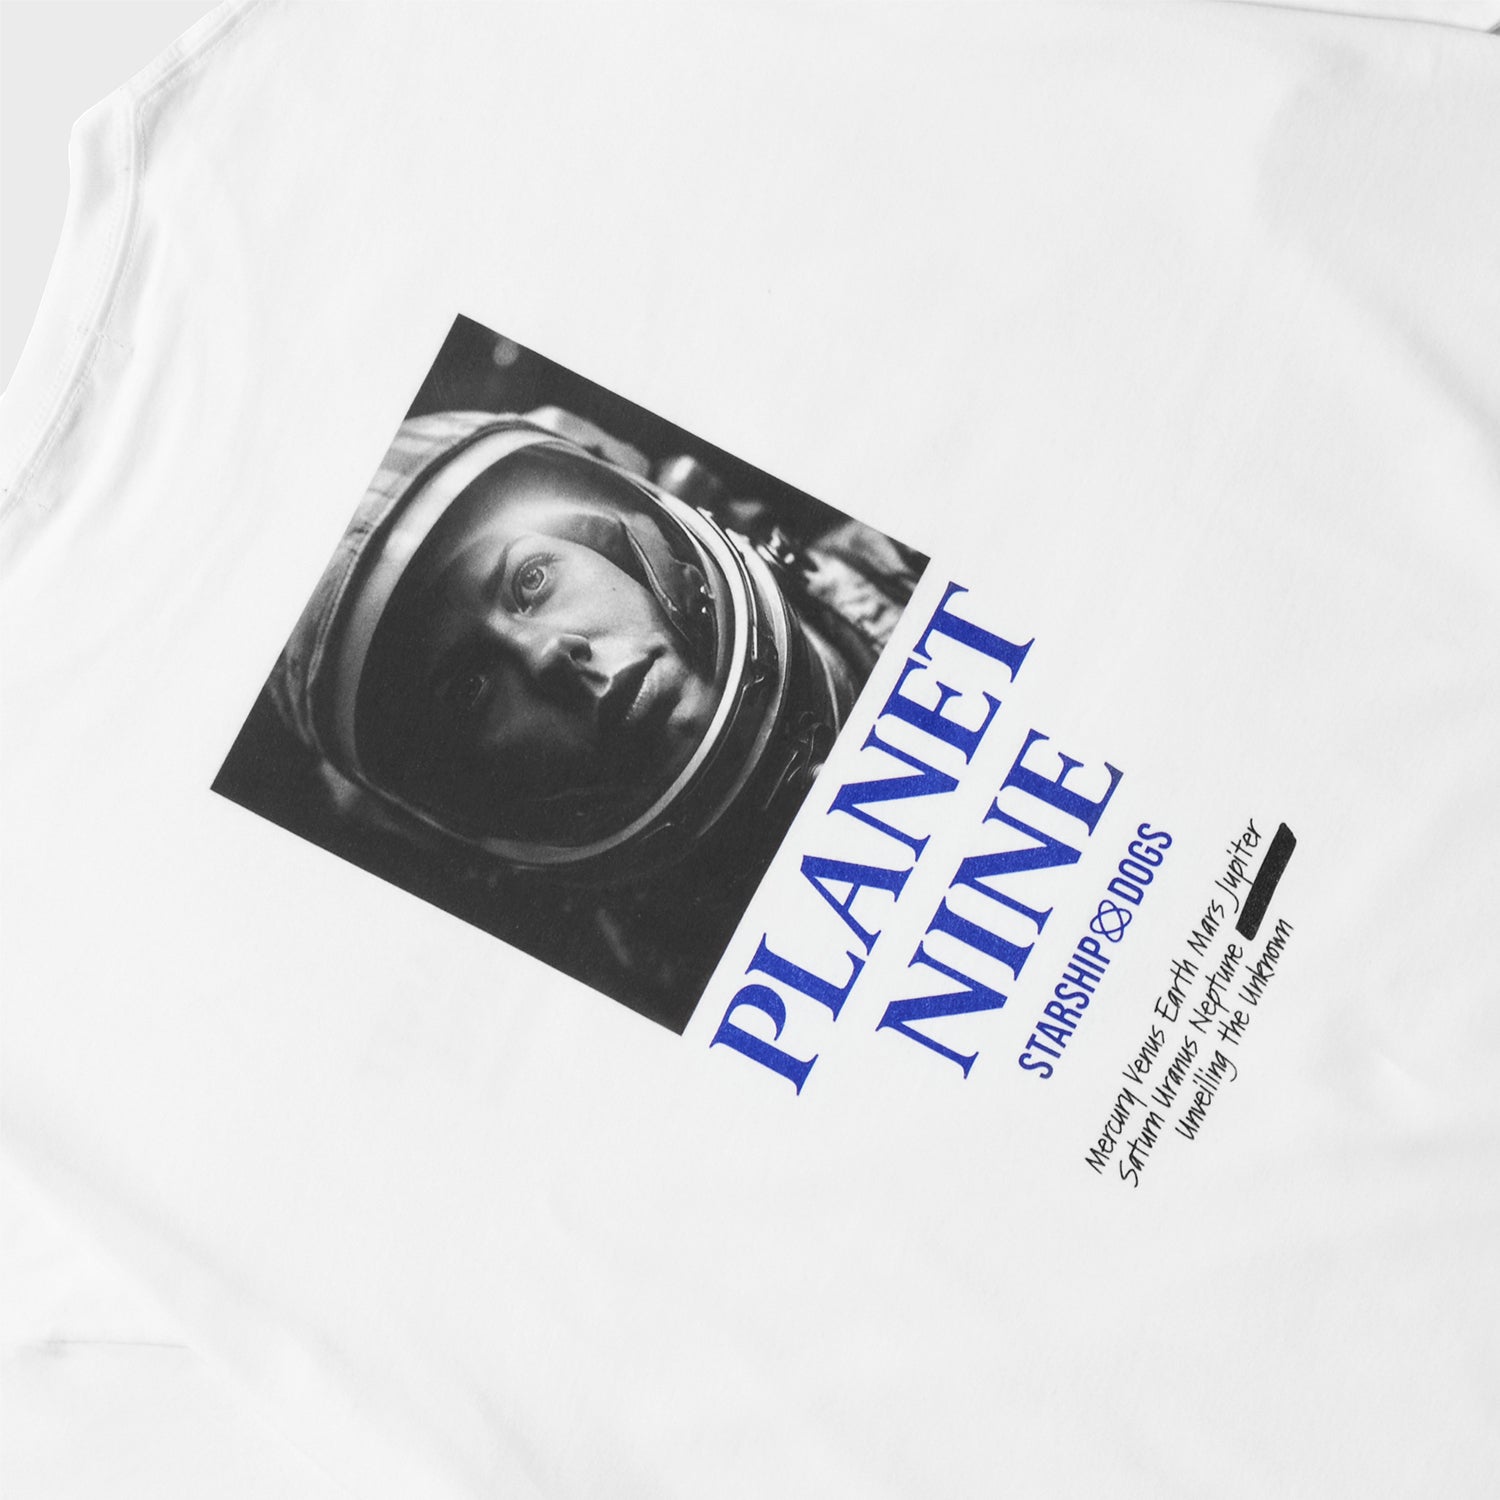 Product Photo: Back print on a white T-shirt. The print showcases a monochrome square photo of a female astronaut's face. Below the photo, the first line reads 'PLANET NINE' in a two-tiered text arrangement. Below that is the brand name 'STARSHIP DOGS.' Further down, in a handwritten-style font, are the names 'Mercury, Venus, Earth, Mars, Jupiter, Saturn, Uranus, Neptune,' followed by another planet name that was previously obscured and blacked out, accompanied by the phrase 'Unveiling the unknown'.